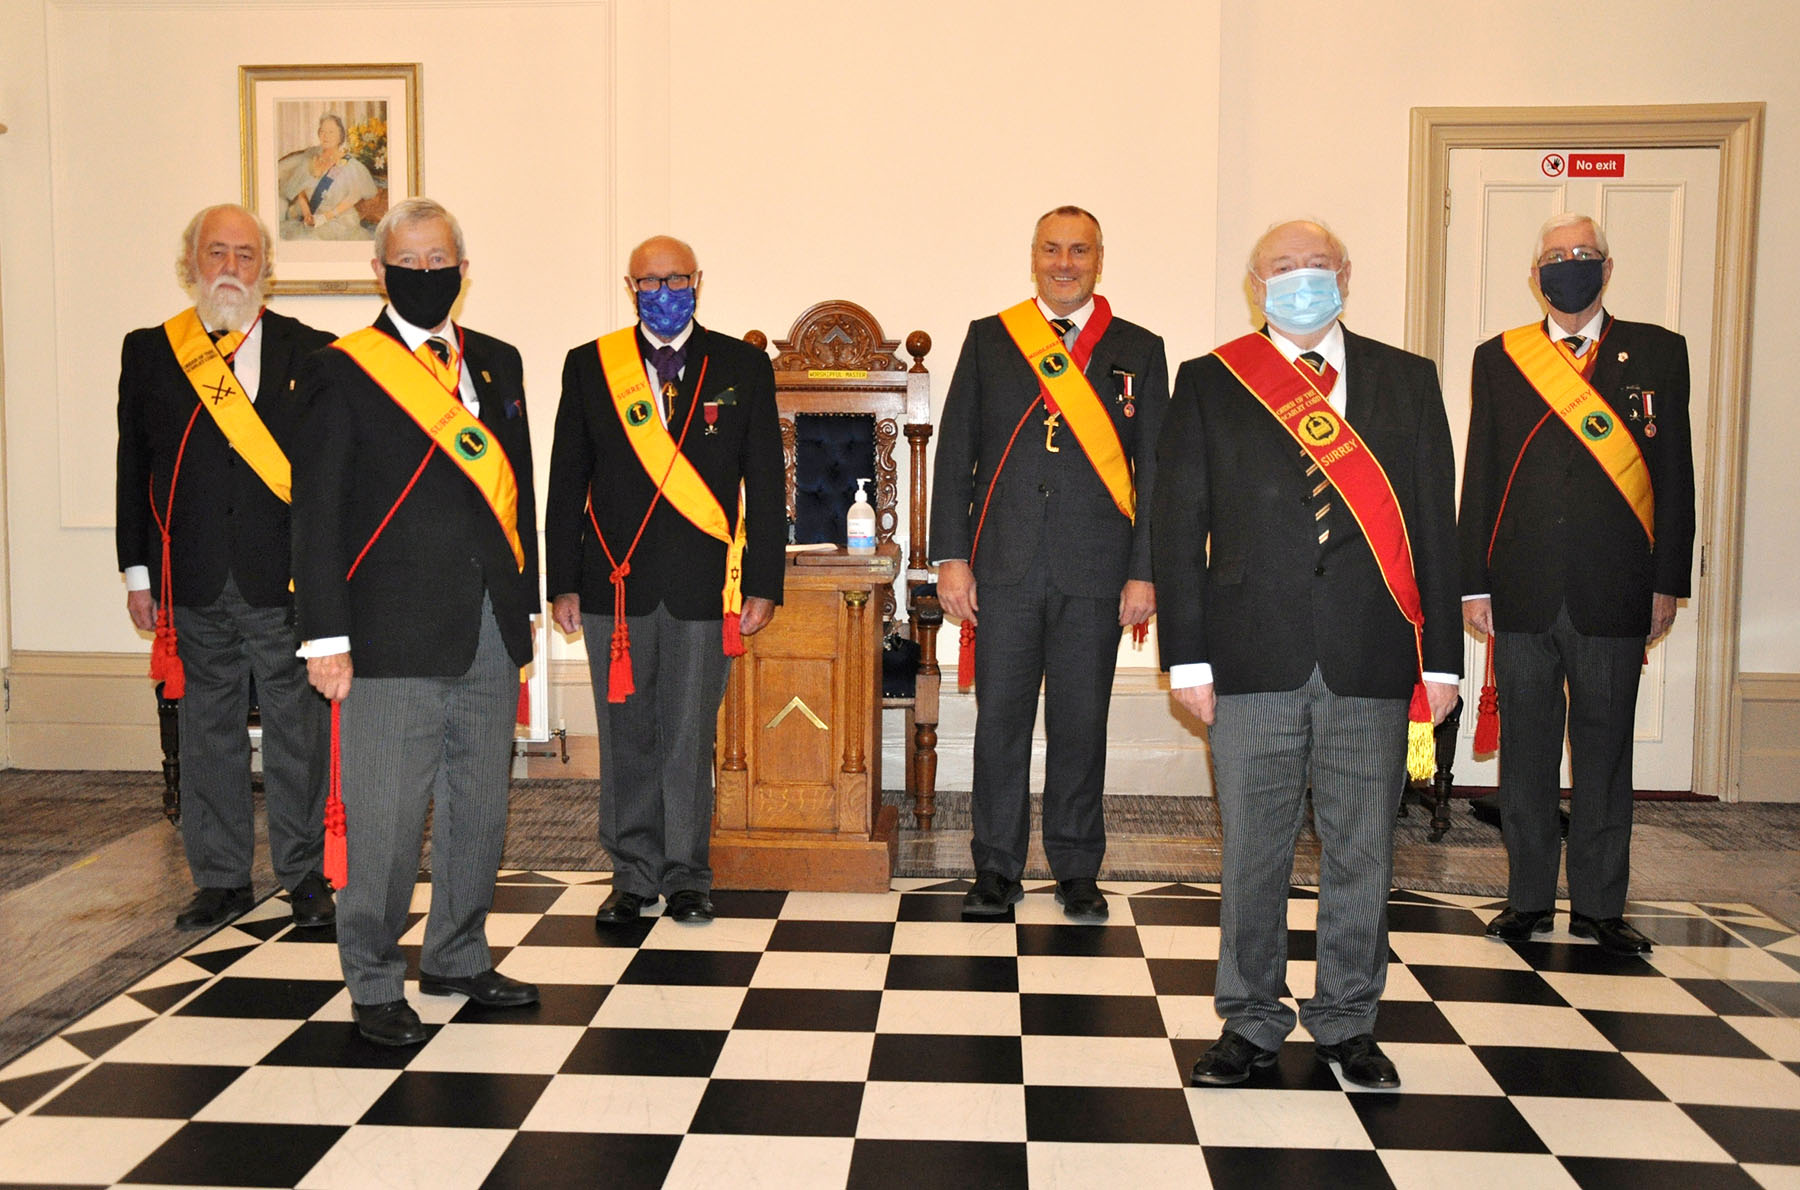 The Second Meeting of Warlingham Consistory